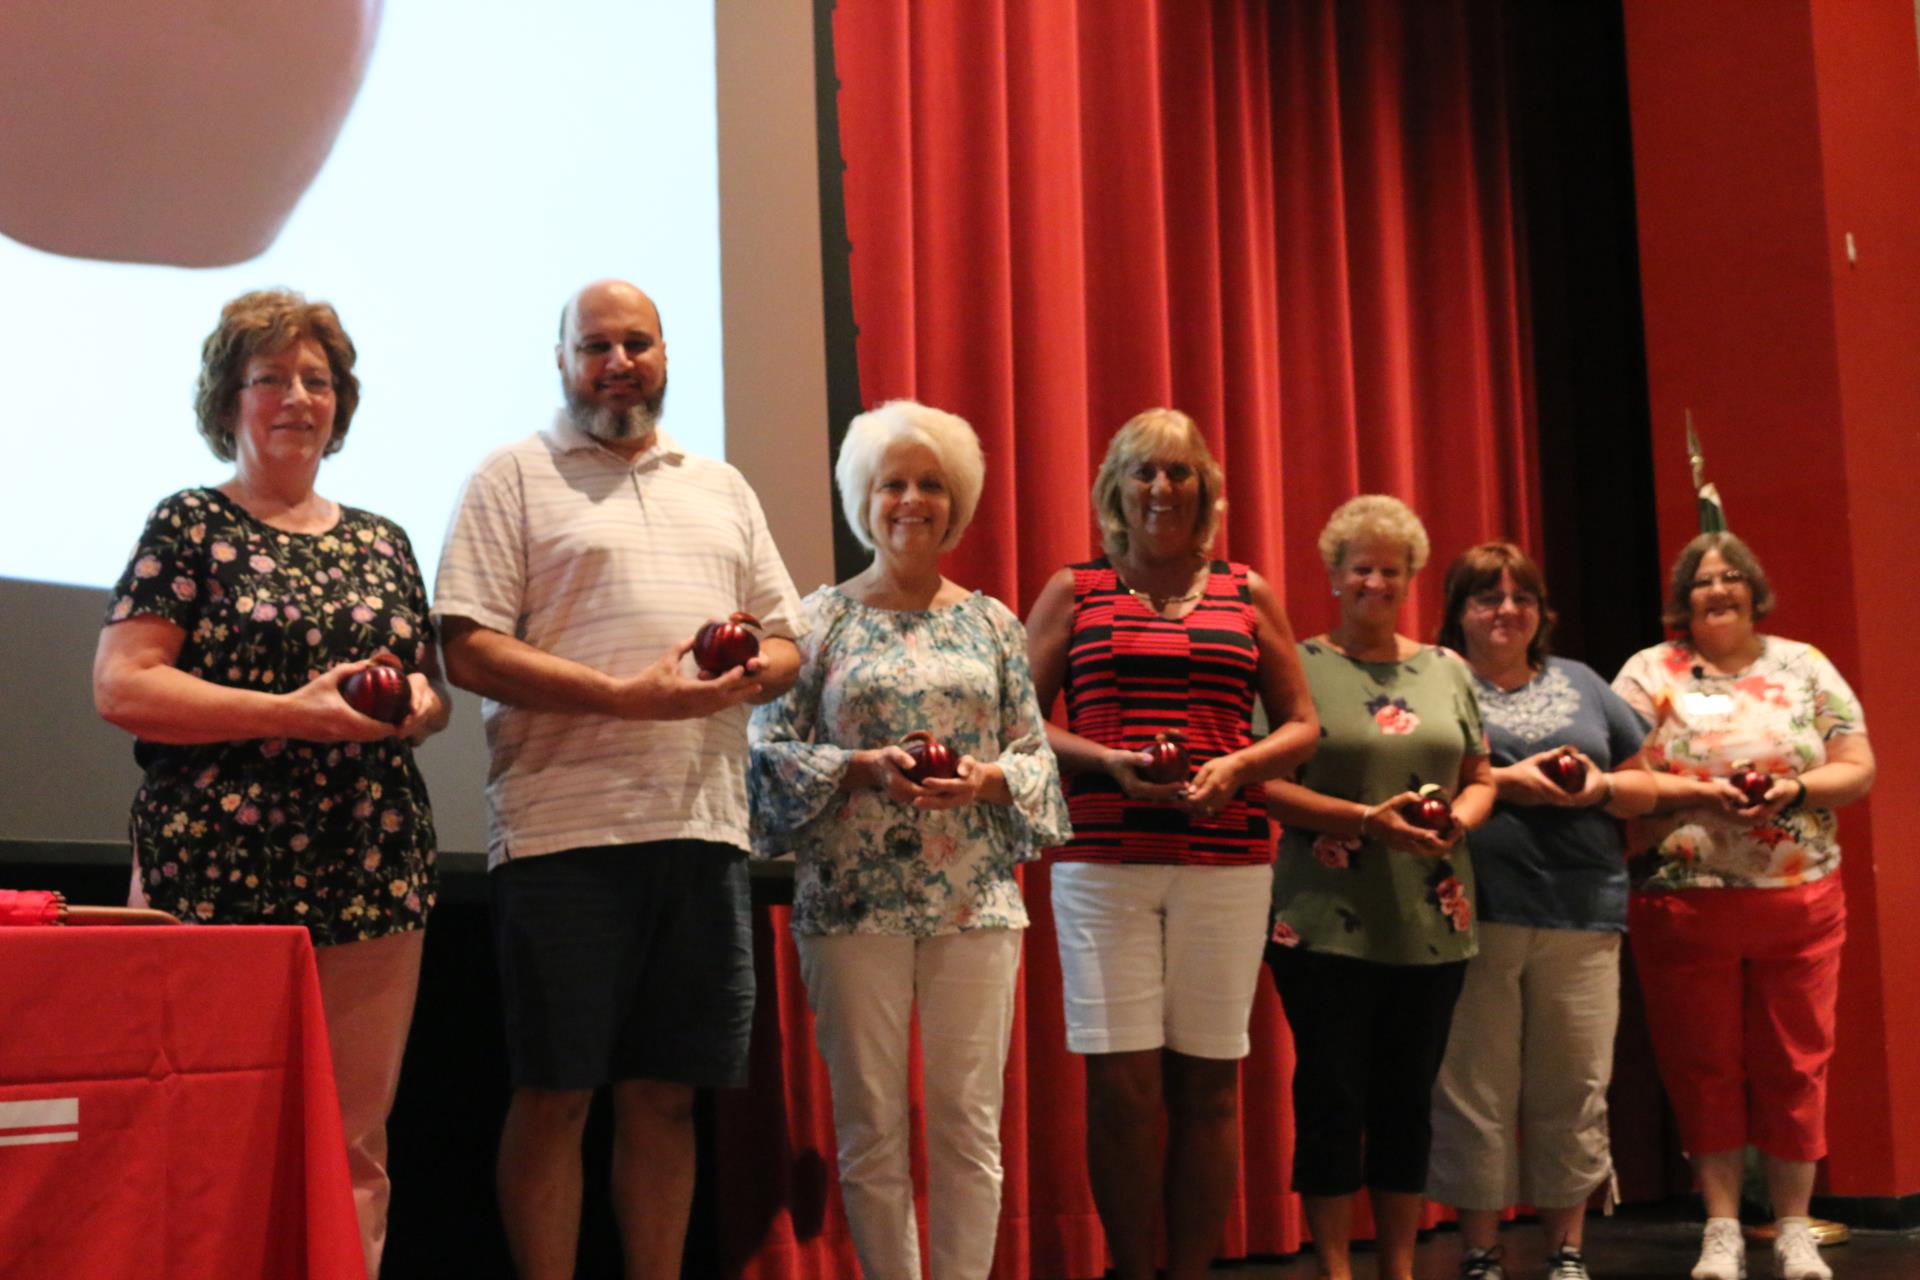 Crimson Apple recipients pose with their awards at the opening convocation.